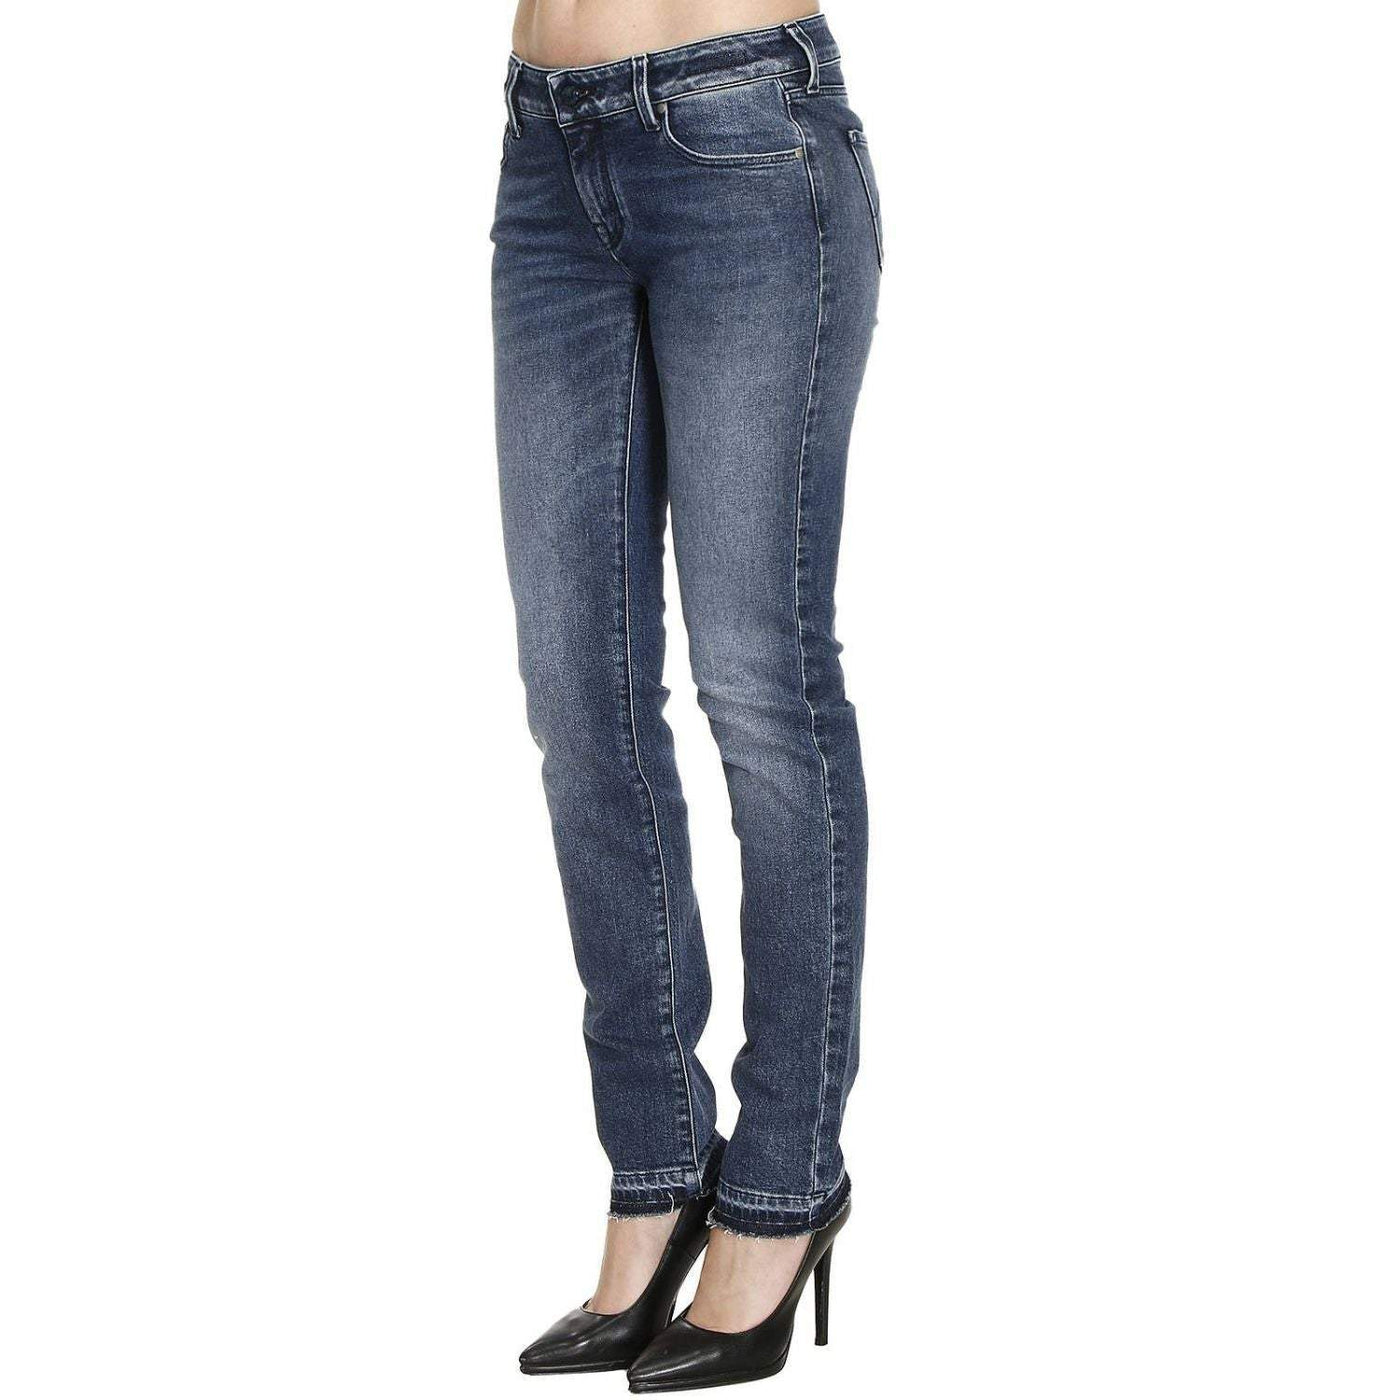 Jacob Cohenslim fit used effect Jeans & Pant #women, Blue, feed-agegroup-adult, feed-color-Blue, feed-gender-female, Jacob Cohen, Jeans & Pants - Women - Clothing, W26 | IT40, W27 | IT41, W28 | IT42, W30 | IT44, W31 | IT45 at SEYMAYKA